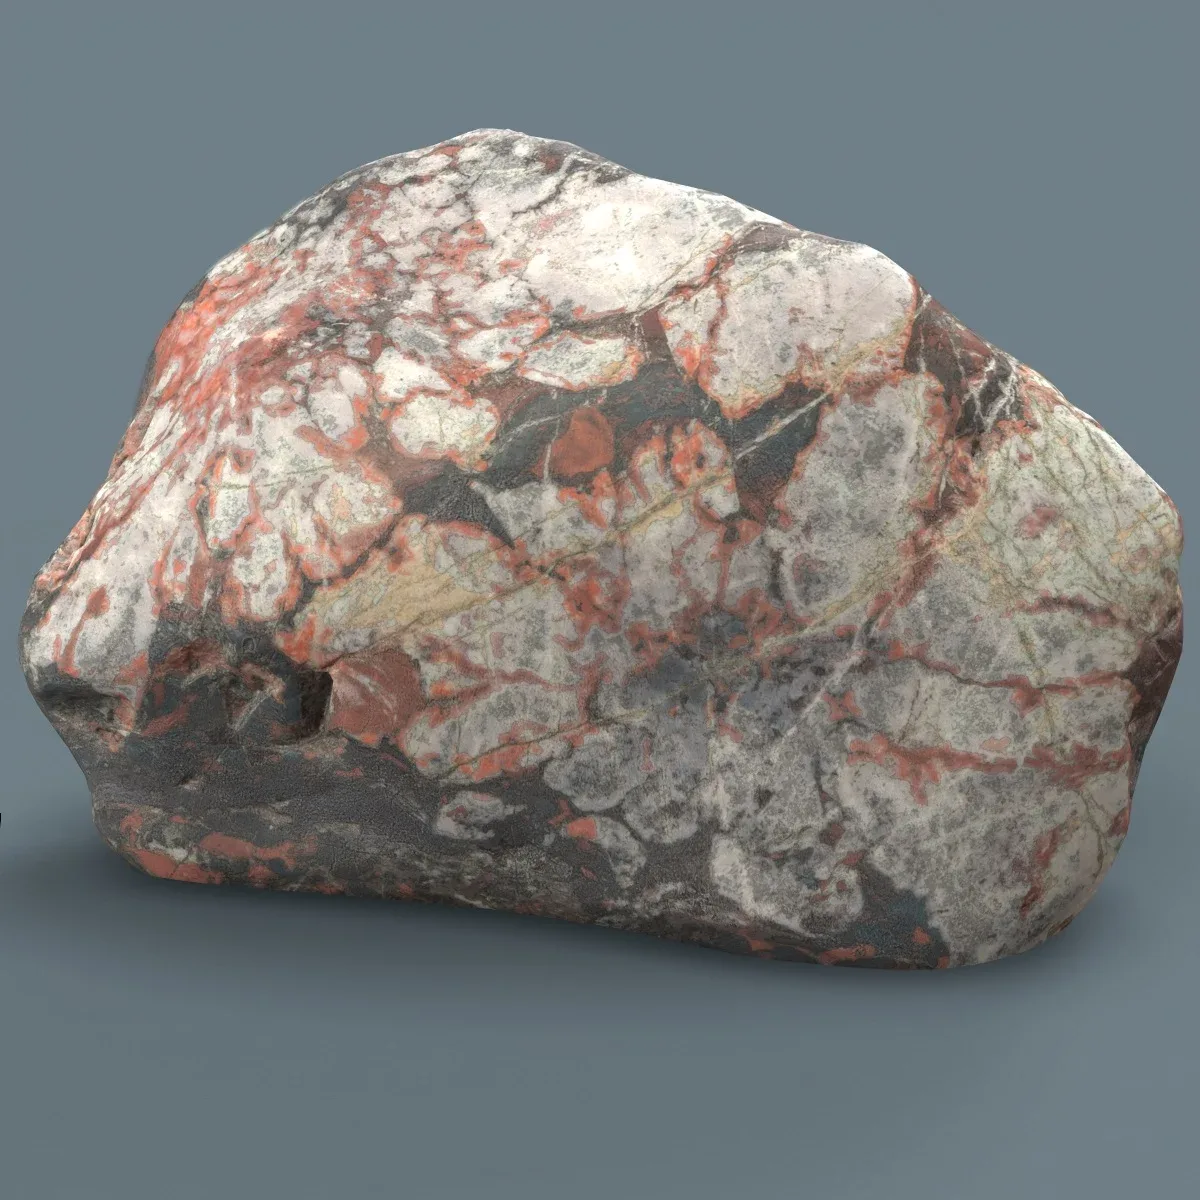 Suiseki Stone 24 from Japan - High-Quality 3D Model with Metallic-Roughness PBR Textures for Games, VR, and Art Projects